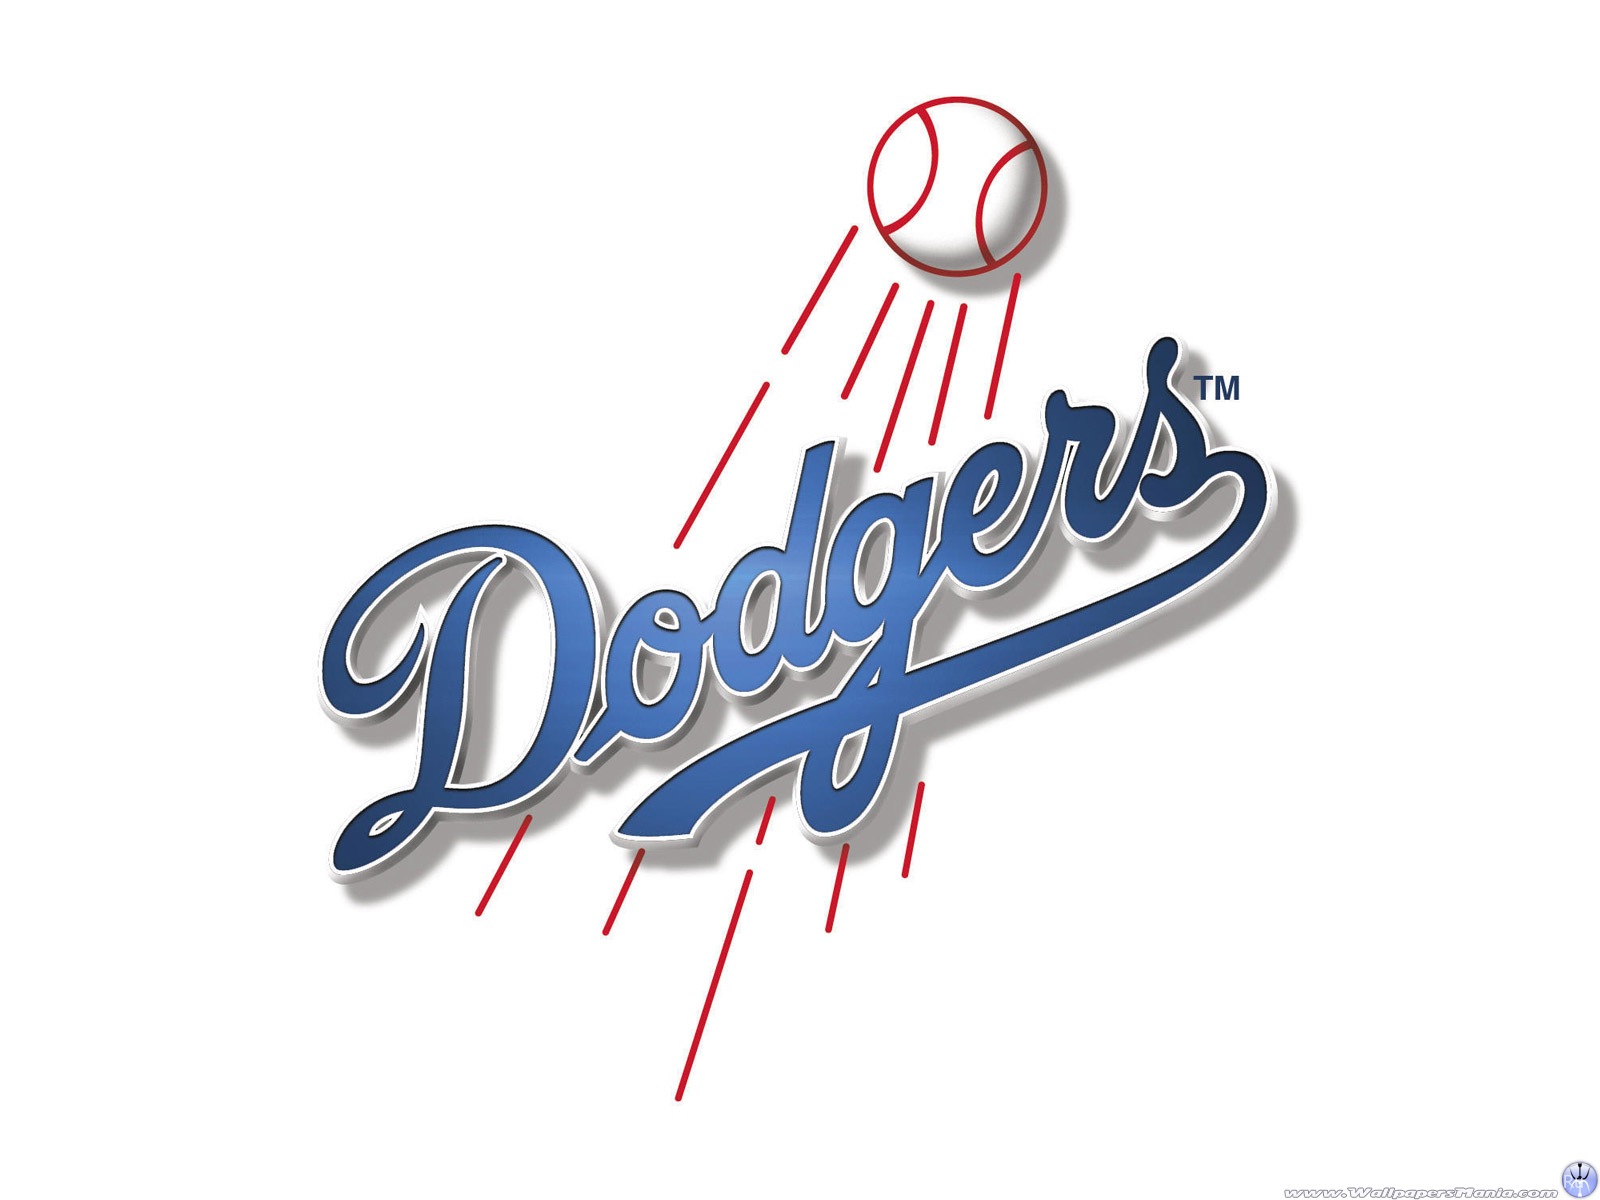 Los Angeles Dodgers Baseball Mlb Jf Wallpapers Hd Desktop And Mobile Backgrounds